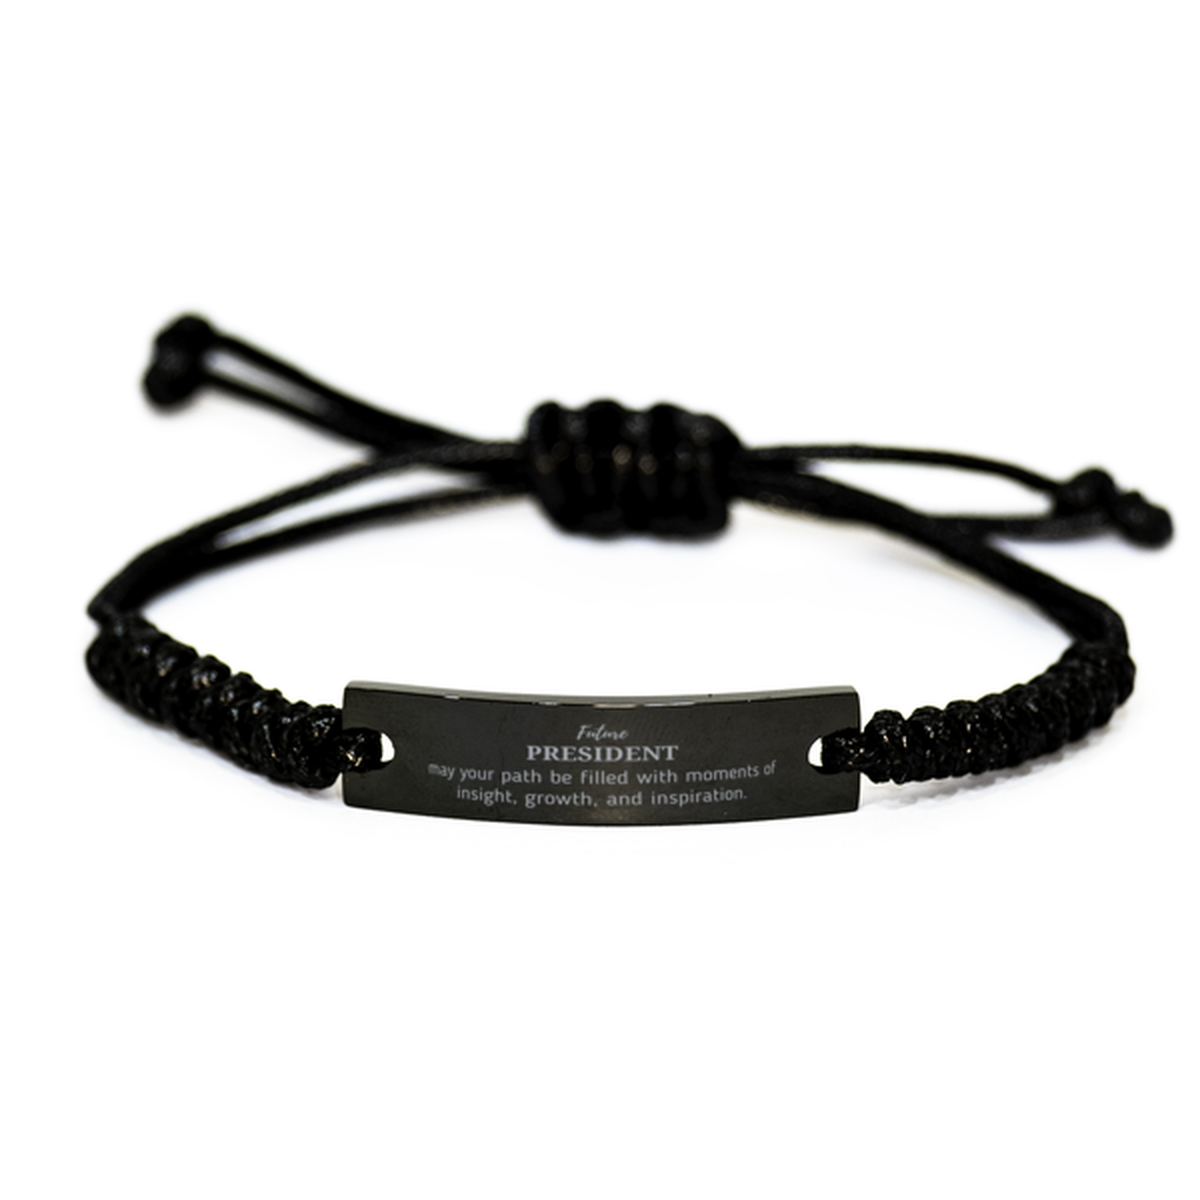 Future President Gifts, May your path be filled with moments of insight, Graduation Gifts for New President, Christmas Unique Black Rope Bracelet For Men, Women, Friends